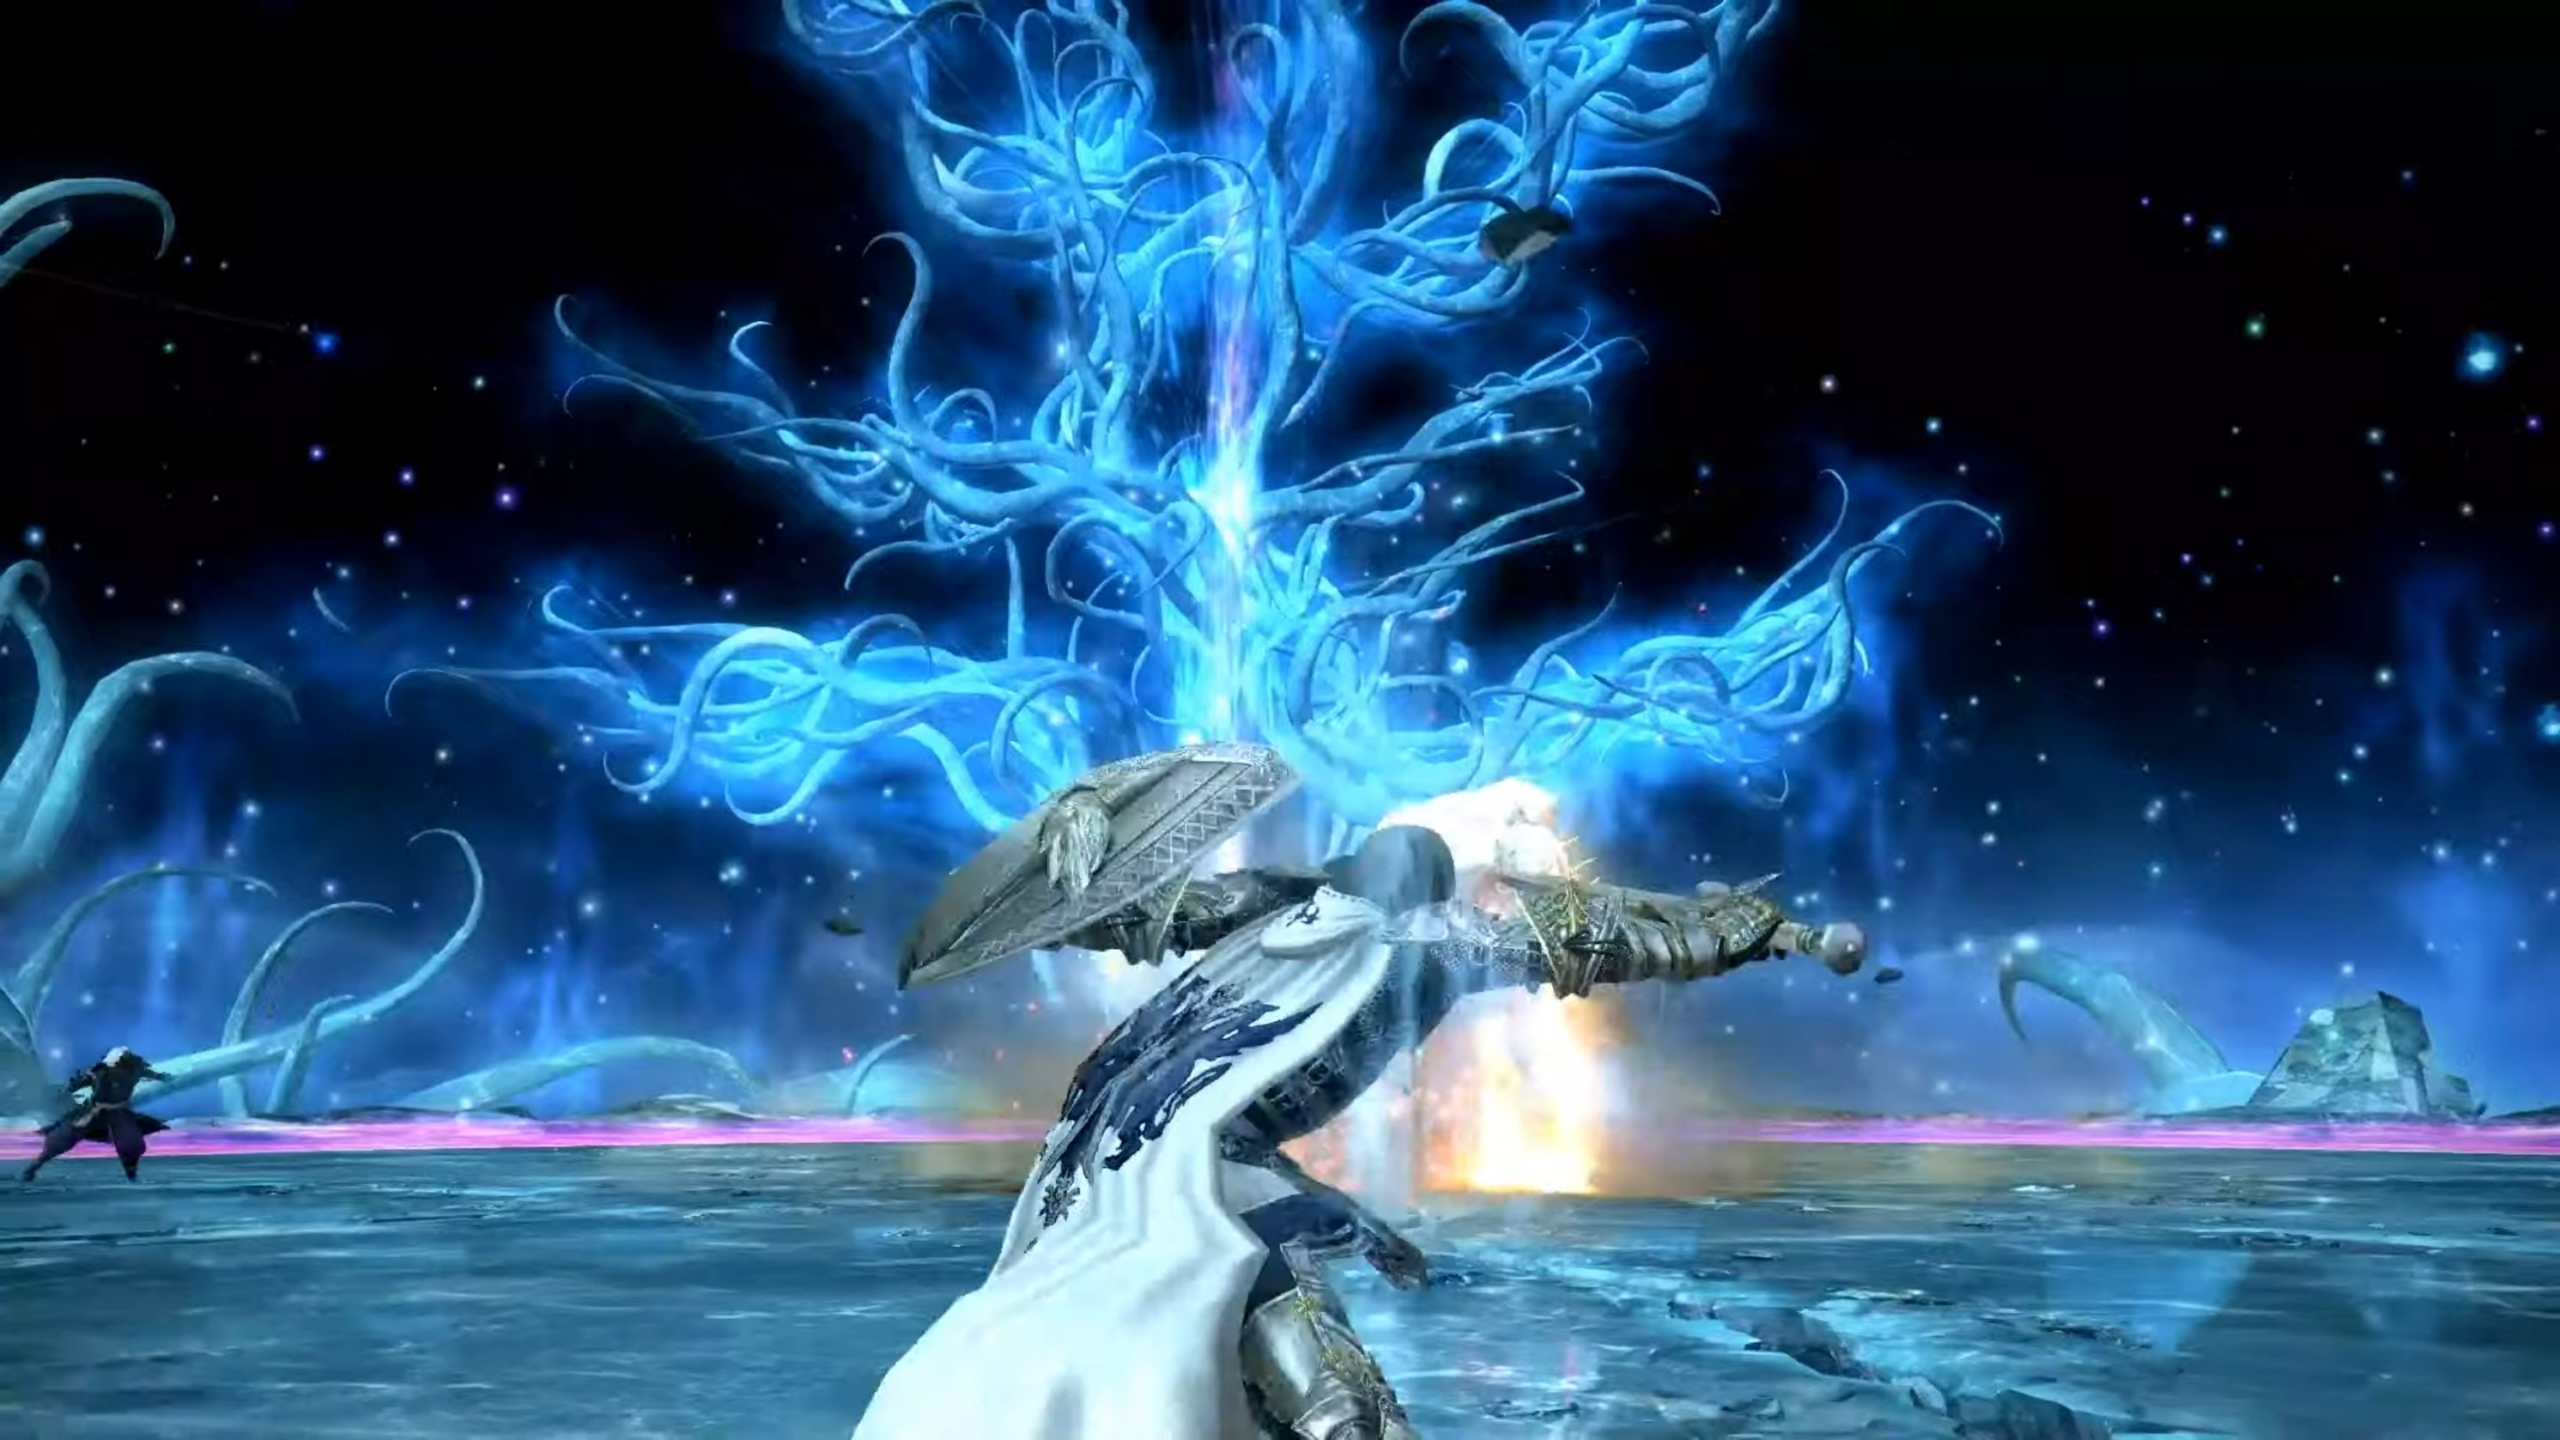 Final Fantasy XIV Patch 6.4 brings party buffs to everyone